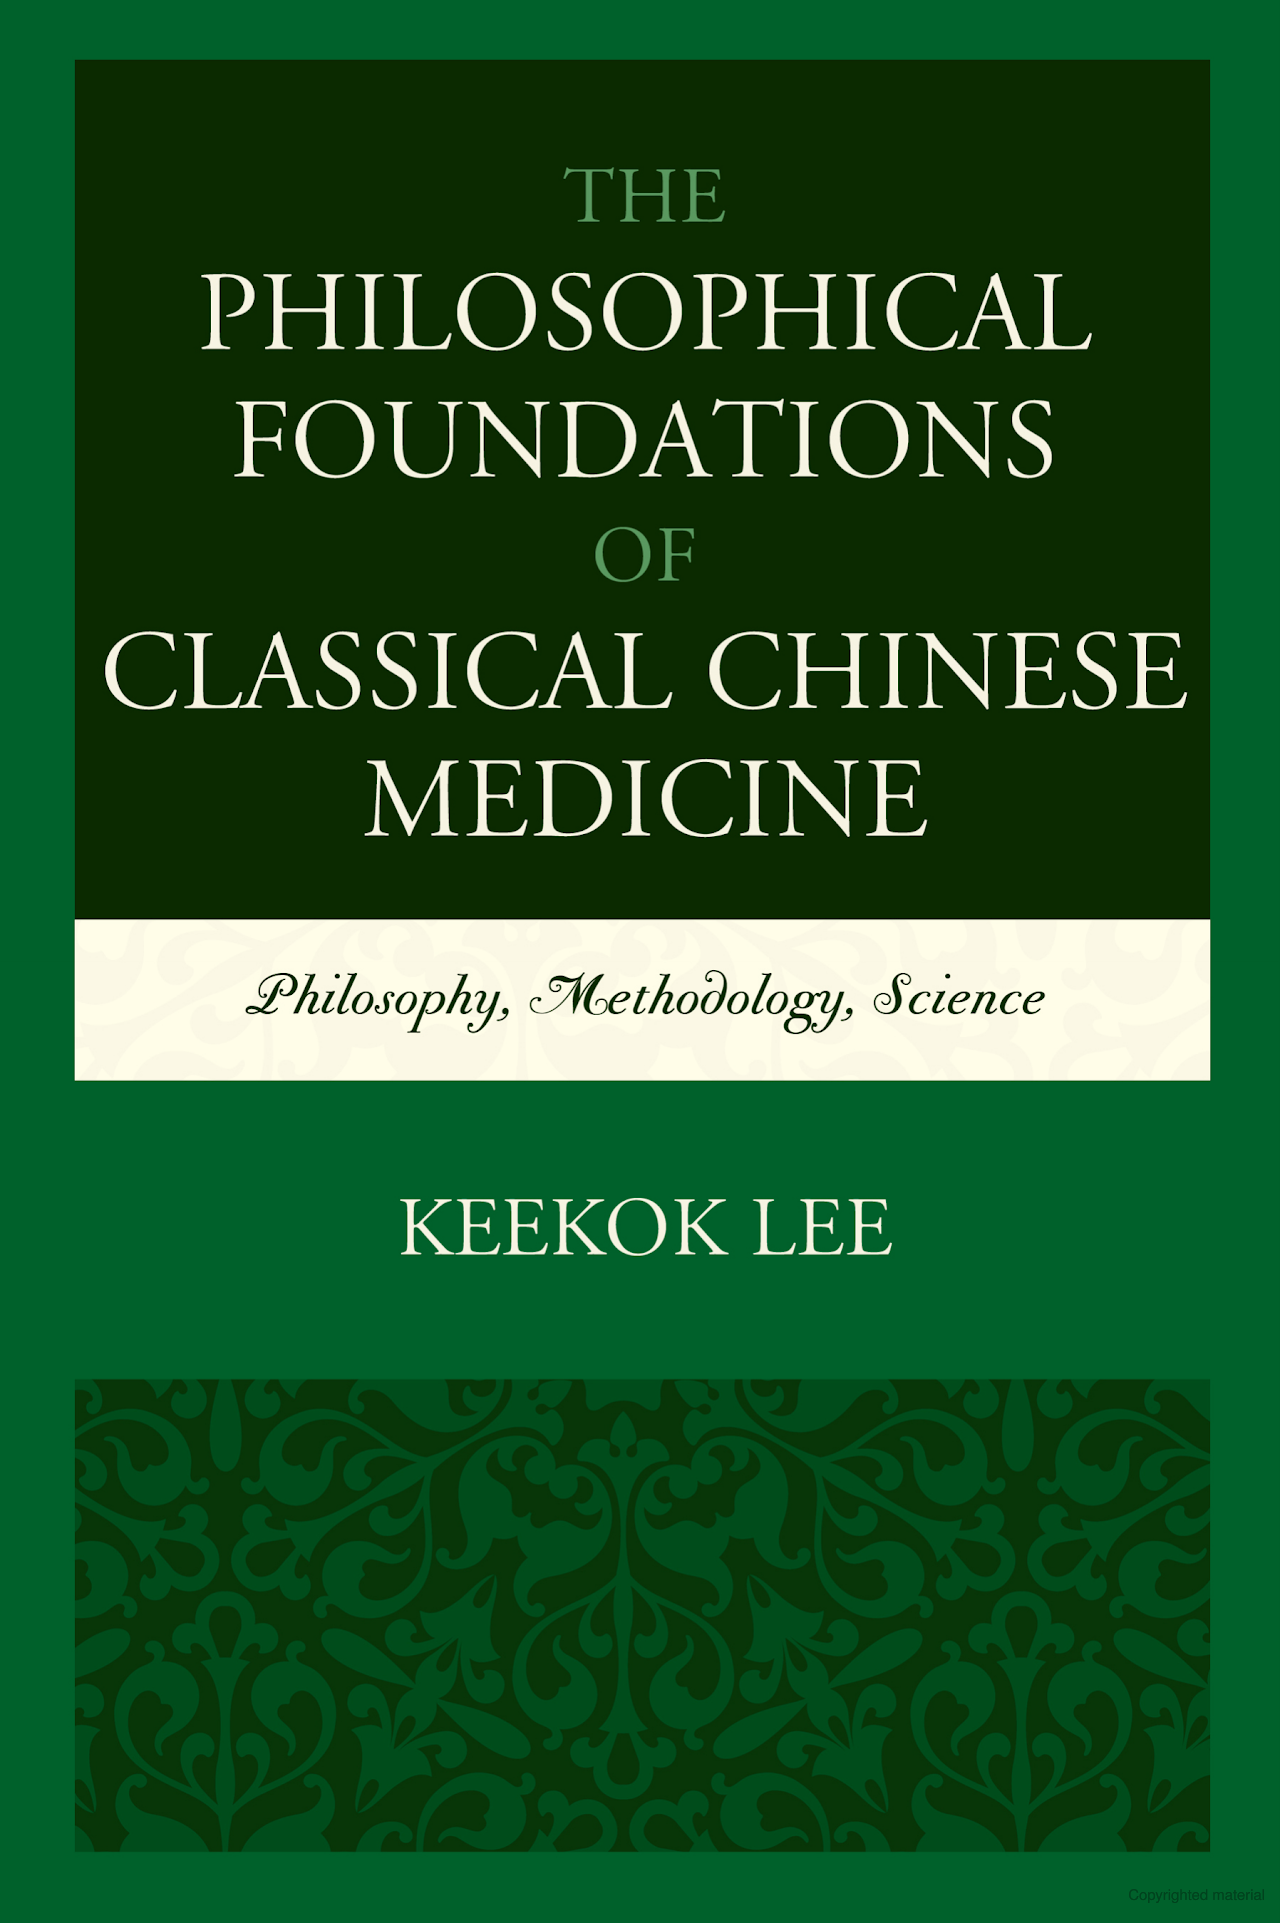 Keekook Lee (2017) The Philosophical Foundations of Classical Chinese Medicine